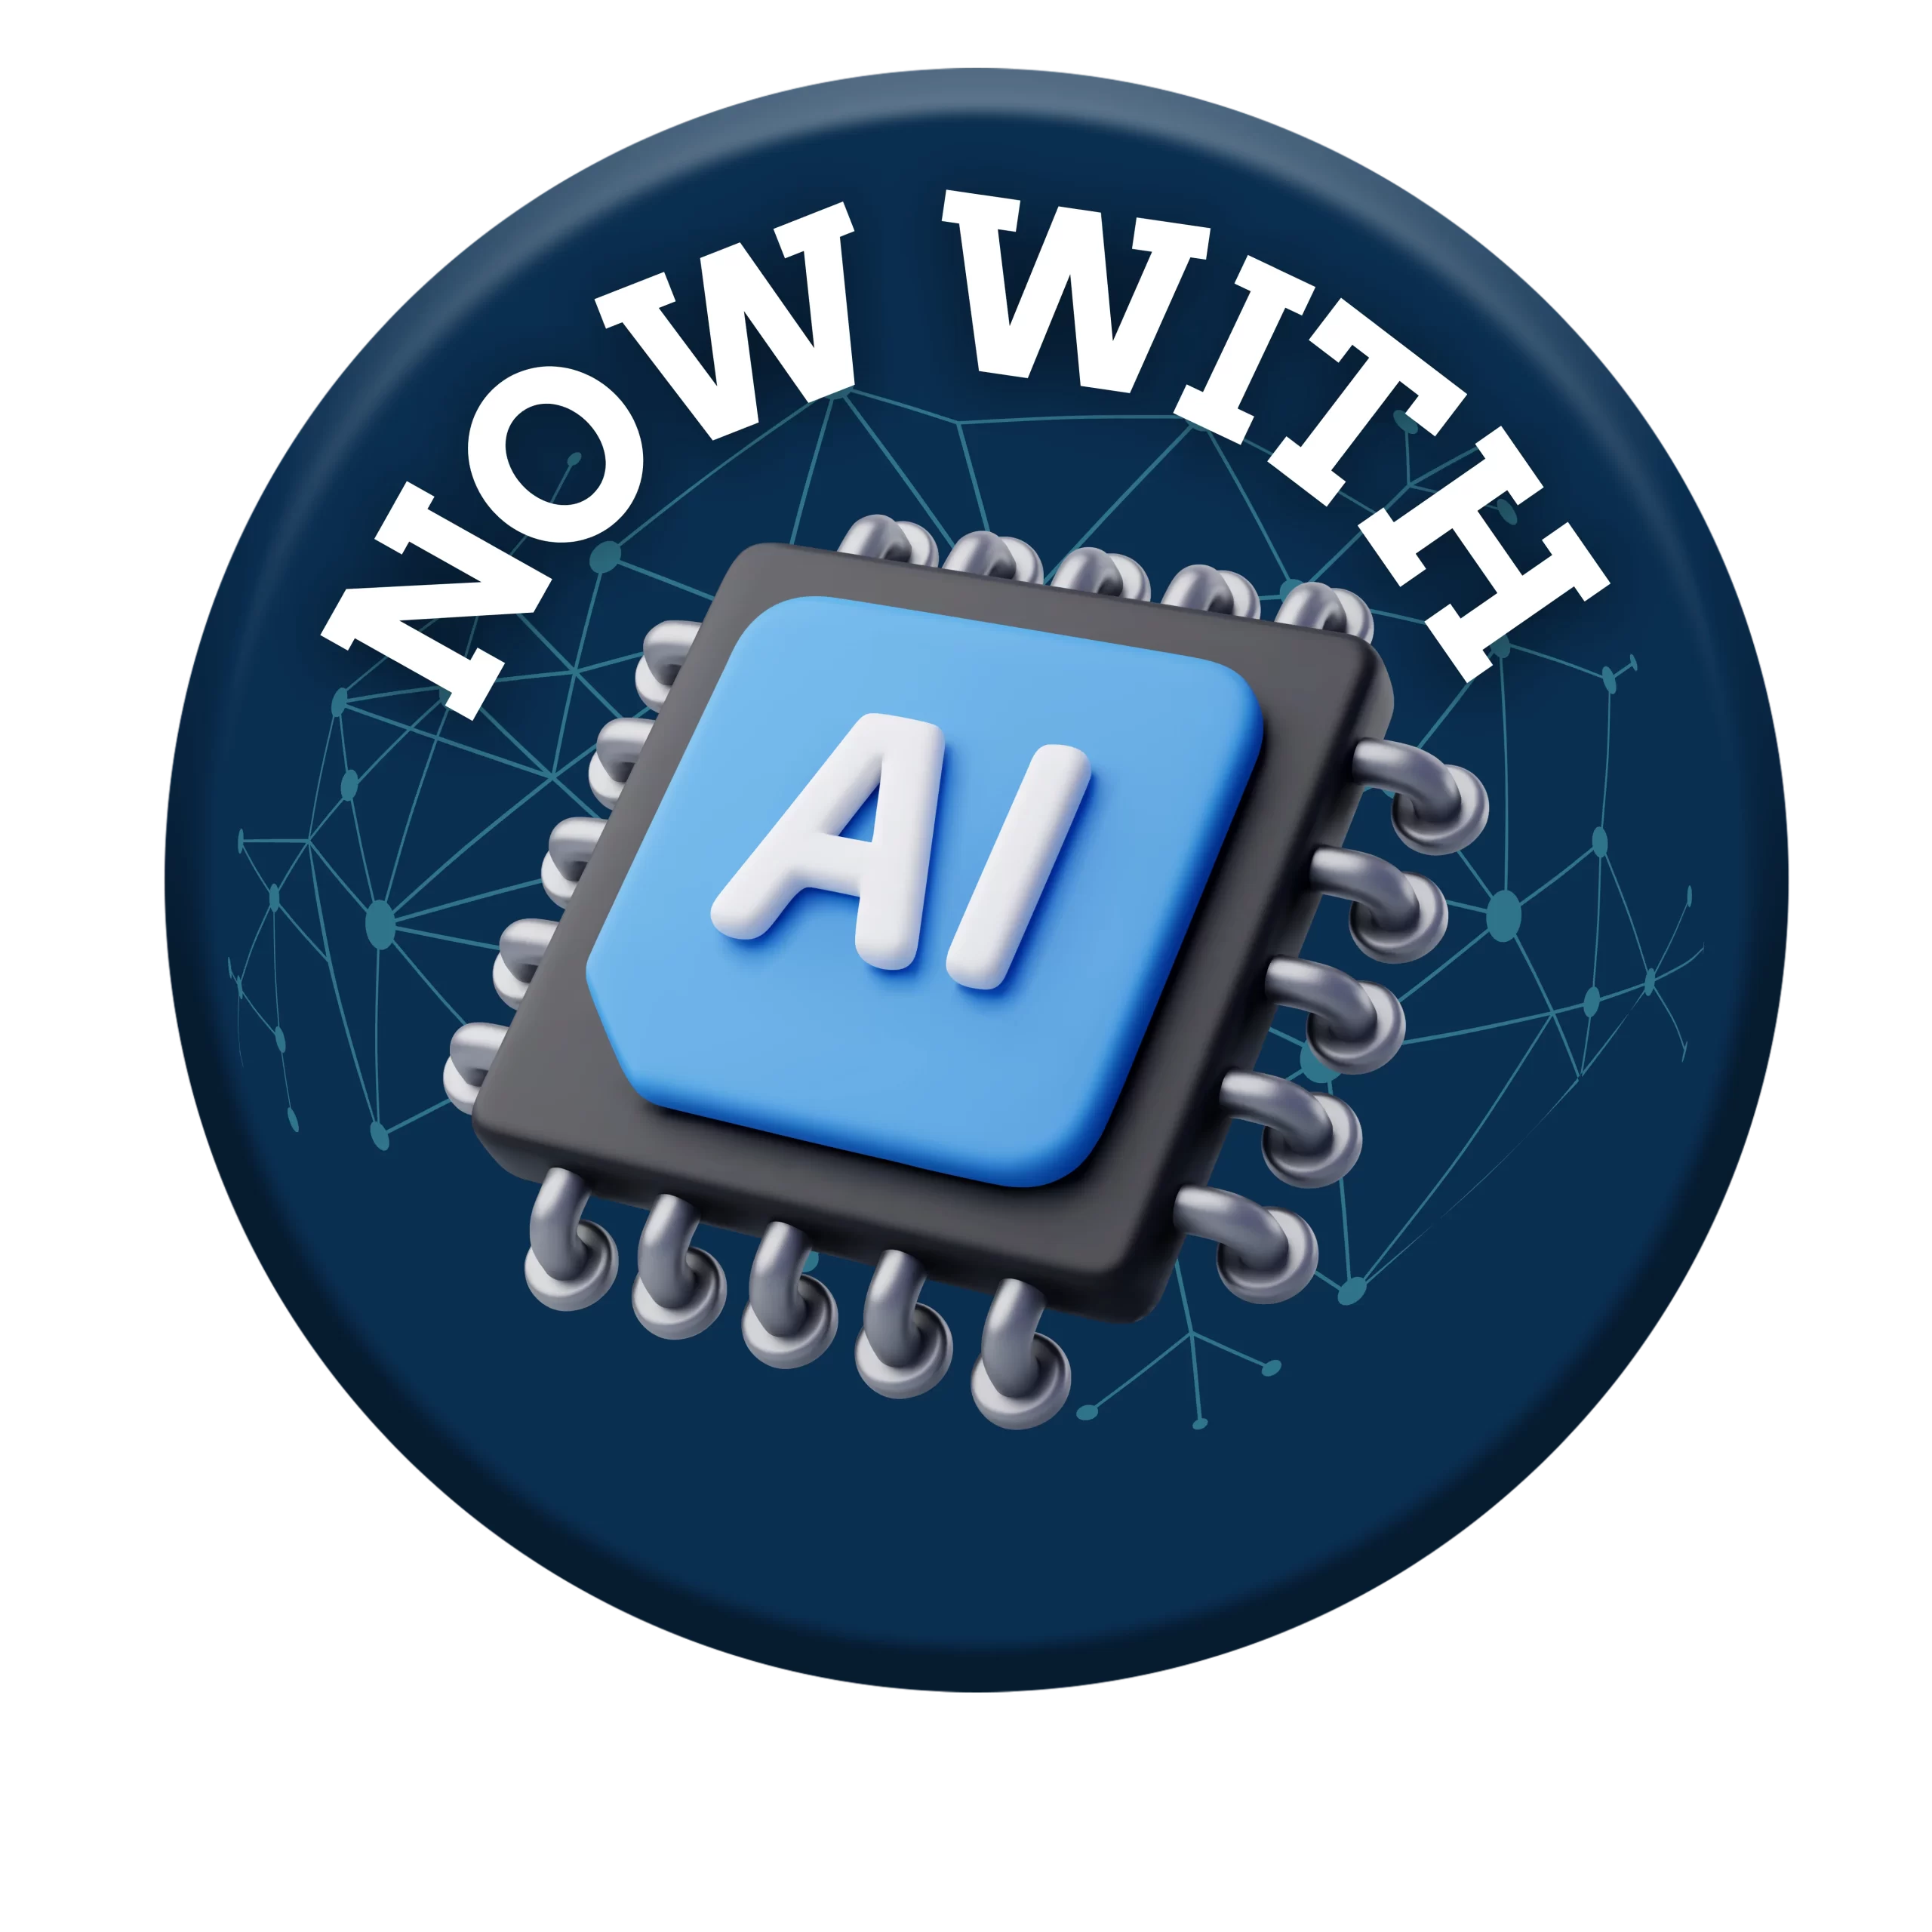 Now with AI